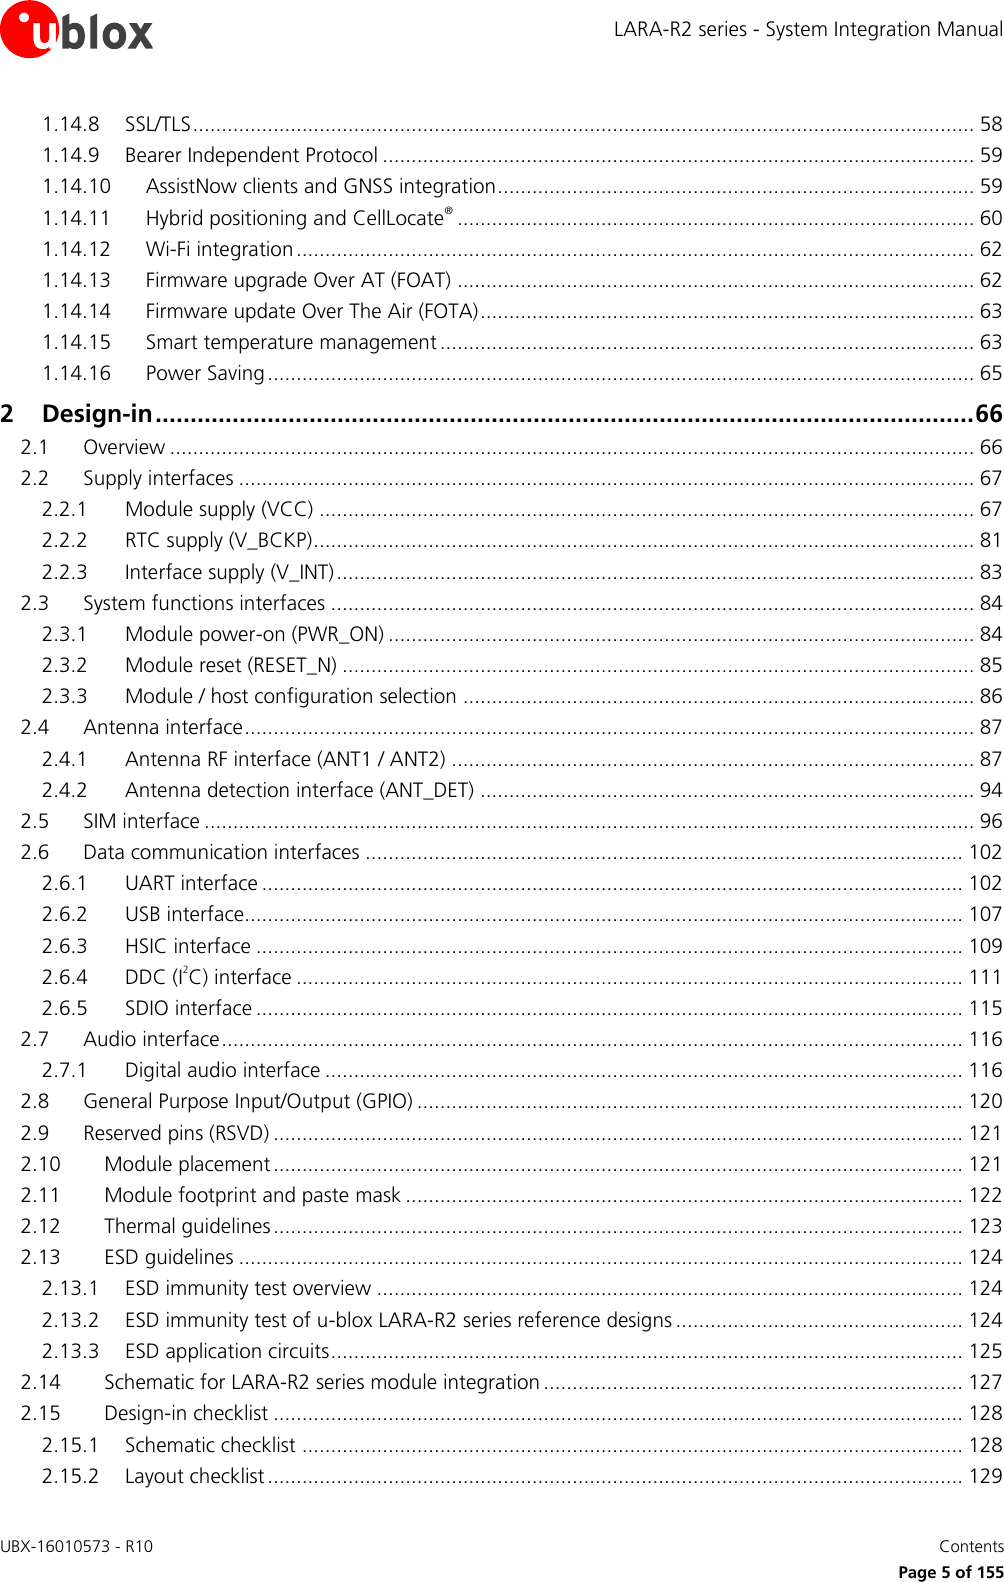 LARA-R2 series - System Integration Manual UBX-16010573 - R10    Contents     Page 5 of 155 1.14.8 SSL/TLS ........................................................................................................................................ 58 1.14.9 Bearer Independent Protocol ....................................................................................................... 59 1.14.10 AssistNow clients and GNSS integration ................................................................................... 59 1.14.11 Hybrid positioning and CellLocate® .......................................................................................... 60 1.14.12 Wi-Fi integration ...................................................................................................................... 62 1.14.13 Firmware upgrade Over AT (FOAT) .......................................................................................... 62 1.14.14 Firmware update Over The Air (FOTA) ...................................................................................... 63 1.14.15 Smart temperature management ............................................................................................. 63 1.14.16 Power Saving ........................................................................................................................... 65 2 Design-in ..................................................................................................................... 66 2.1 Overview ............................................................................................................................................ 66 2.2 Supply interfaces ................................................................................................................................ 67 2.2.1 Module supply (VCC) .................................................................................................................. 67 2.2.2 RTC supply (V_BCKP) ................................................................................................................... 81 2.2.3 Interface supply (V_INT) ............................................................................................................... 83 2.3 System functions interfaces ................................................................................................................ 84 2.3.1 Module power-on (PWR_ON) ...................................................................................................... 84 2.3.2 Module reset (RESET_N) .............................................................................................................. 85 2.3.3 Module / host configuration selection ......................................................................................... 86 2.4 Antenna interface ............................................................................................................................... 87 2.4.1 Antenna RF interface (ANT1 / ANT2) ........................................................................................... 87 2.4.2 Antenna detection interface (ANT_DET) ...................................................................................... 94 2.5 SIM interface ...................................................................................................................................... 96 2.6 Data communication interfaces ........................................................................................................ 102 2.6.1 UART interface .......................................................................................................................... 102 2.6.2 USB interface............................................................................................................................. 107 2.6.3 HSIC interface ........................................................................................................................... 109 2.6.4 DDC (I2C) interface .................................................................................................................... 111 2.6.5 SDIO interface ........................................................................................................................... 115 2.7 Audio interface ................................................................................................................................. 116 2.7.1 Digital audio interface ............................................................................................................... 116 2.8 General Purpose Input/Output (GPIO) ............................................................................................... 120 2.9 Reserved pins (RSVD) ........................................................................................................................ 121 2.10 Module placement ........................................................................................................................ 121 2.11 Module footprint and paste mask ................................................................................................. 122 2.12 Thermal guidelines ........................................................................................................................ 123 2.13 ESD guidelines .............................................................................................................................. 124 2.13.1 ESD immunity test overview ...................................................................................................... 124 2.13.2 ESD immunity test of u-blox LARA-R2 series reference designs .................................................. 124 2.13.3 ESD application circuits .............................................................................................................. 125 2.14 Schematic for LARA-R2 series module integration ......................................................................... 127 2.15 Design-in checklist ........................................................................................................................ 128 2.15.1 Schematic checklist ................................................................................................................... 128 2.15.2 Layout checklist ......................................................................................................................... 129 